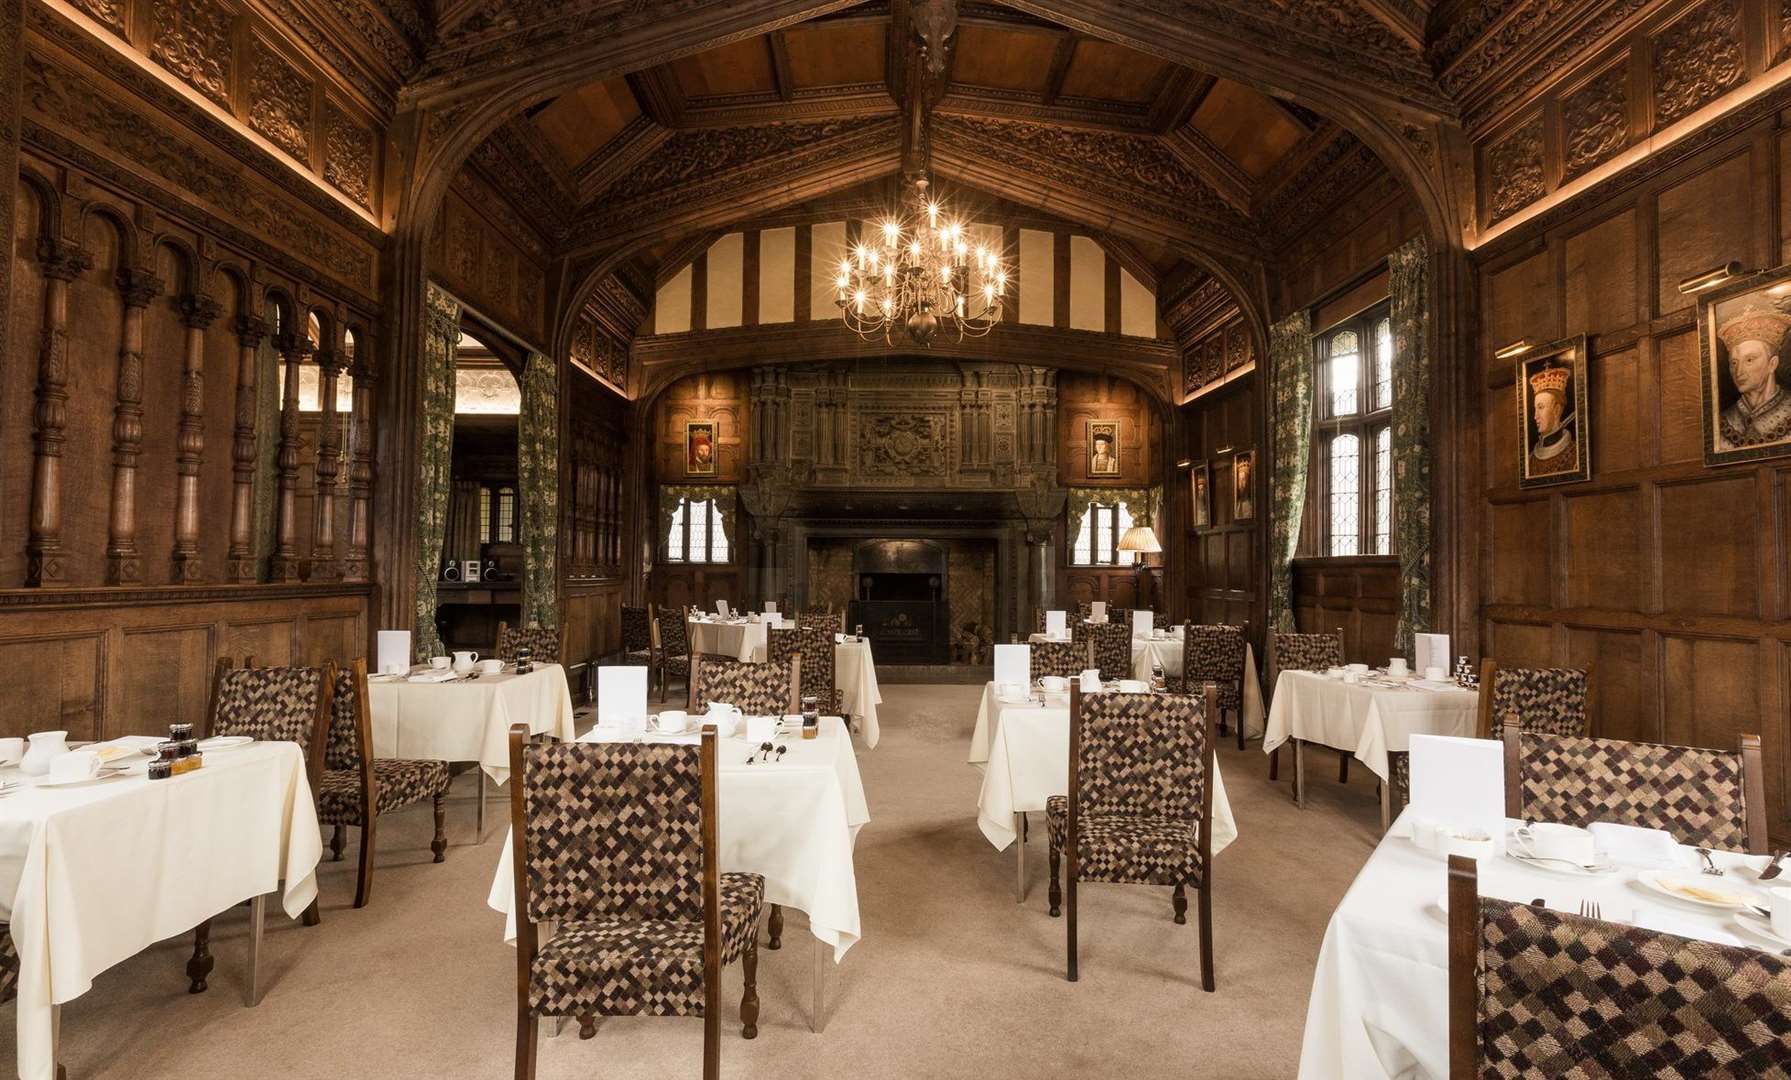 Eat breakfast surrounded by history Picture: Hever Castle & Gardens